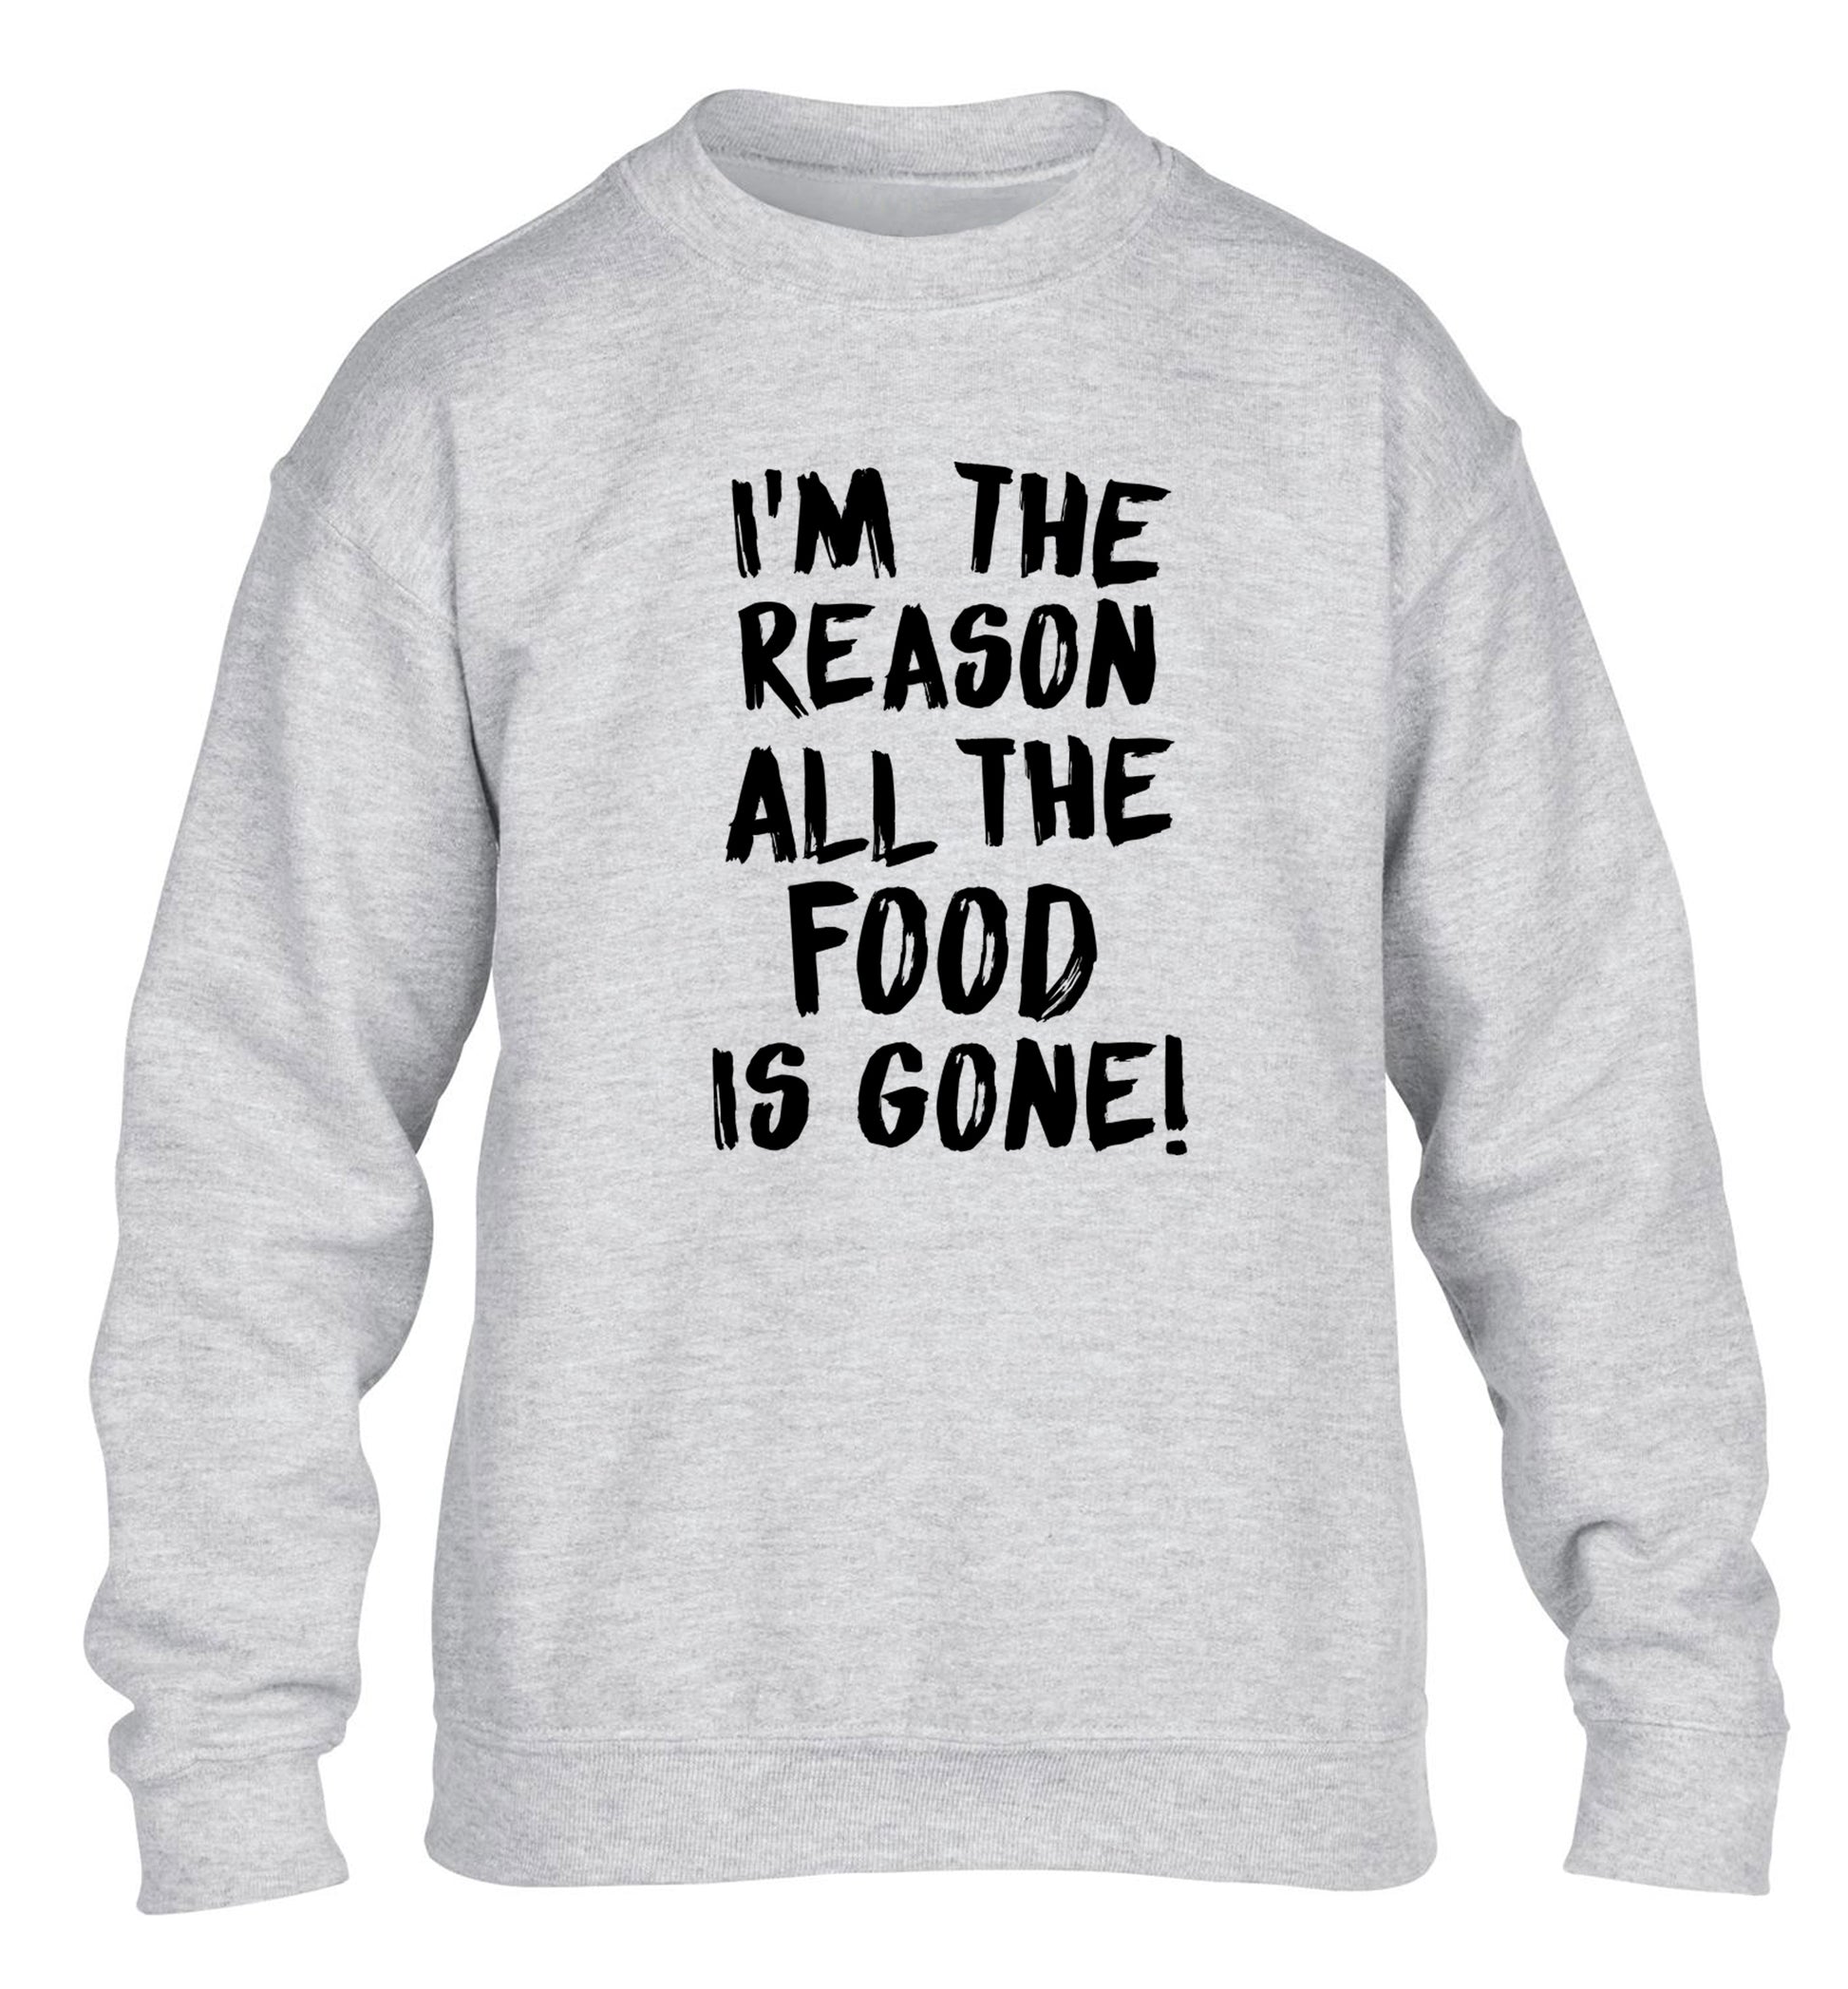 I'm the reason why all the food is gone children's grey sweater 12-13 Years